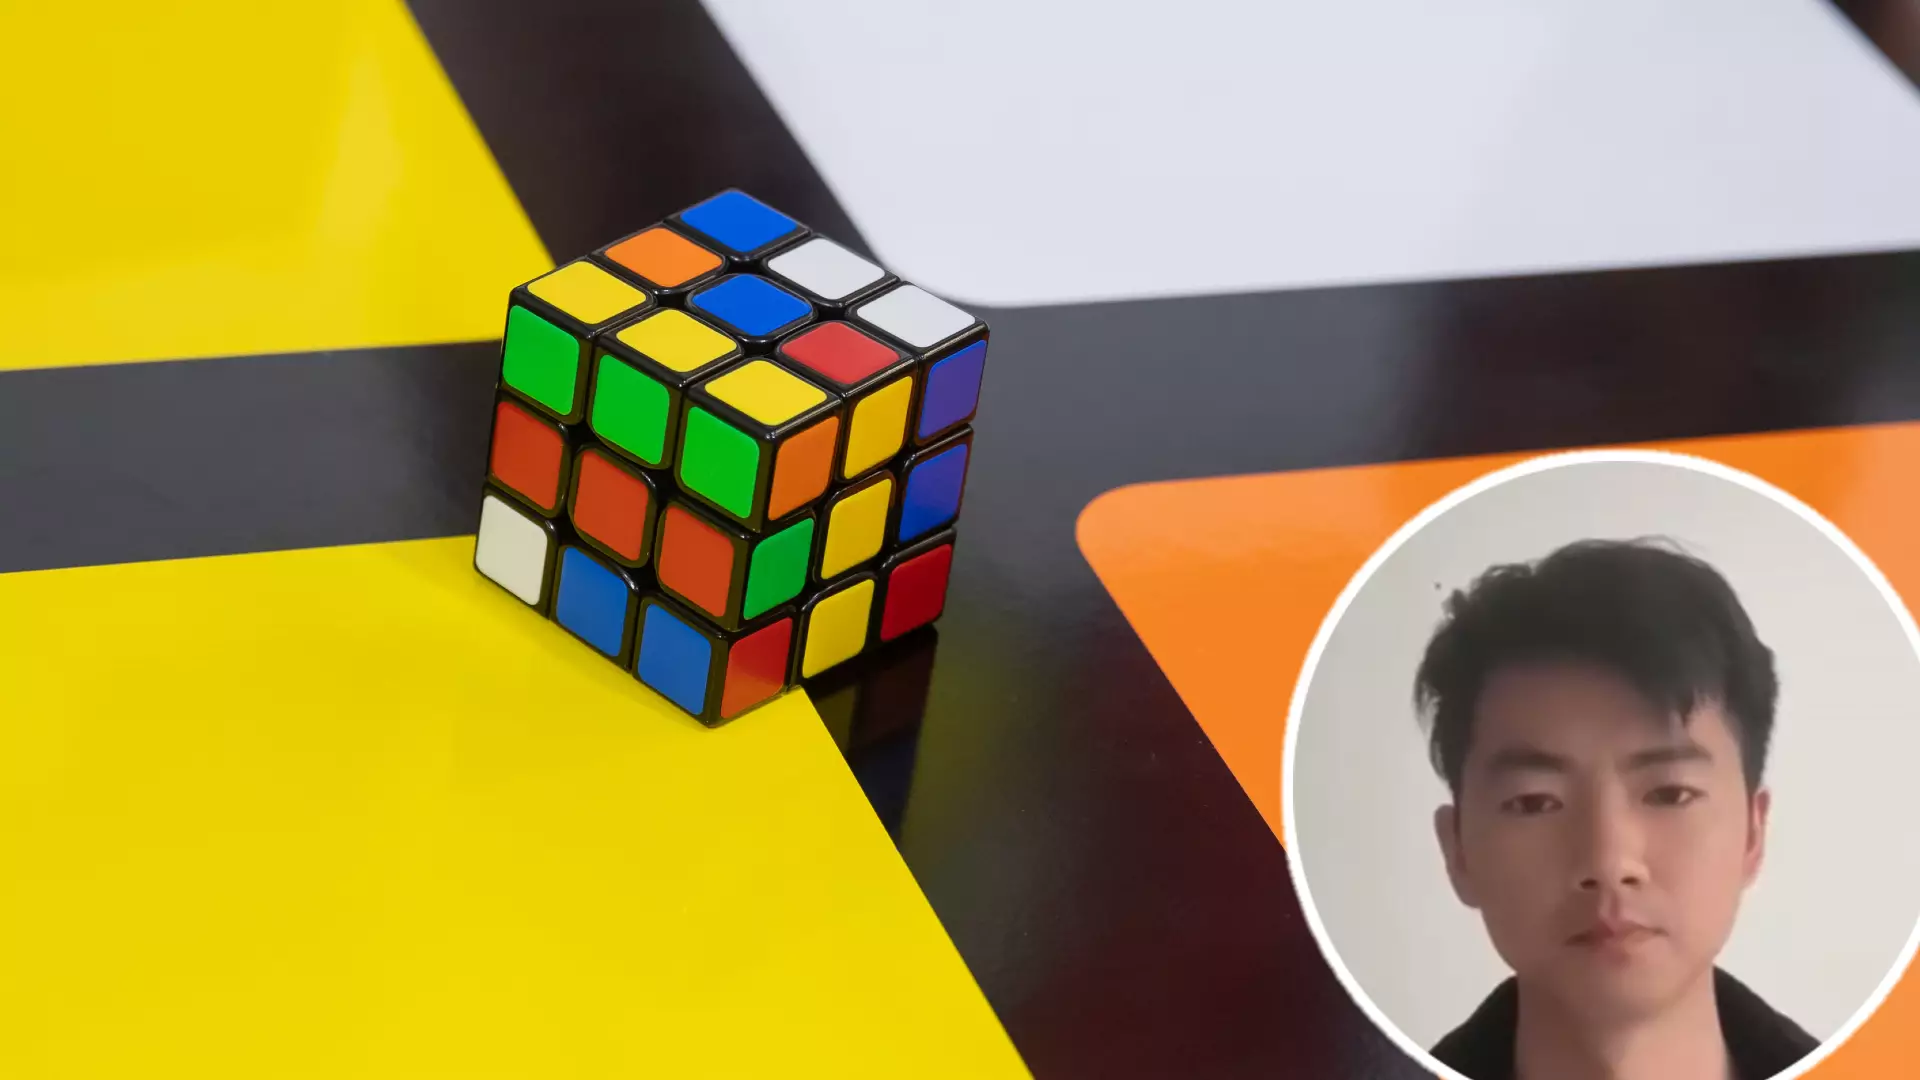 Man Blind Solves Rubik’s Cube In A Very Different Way